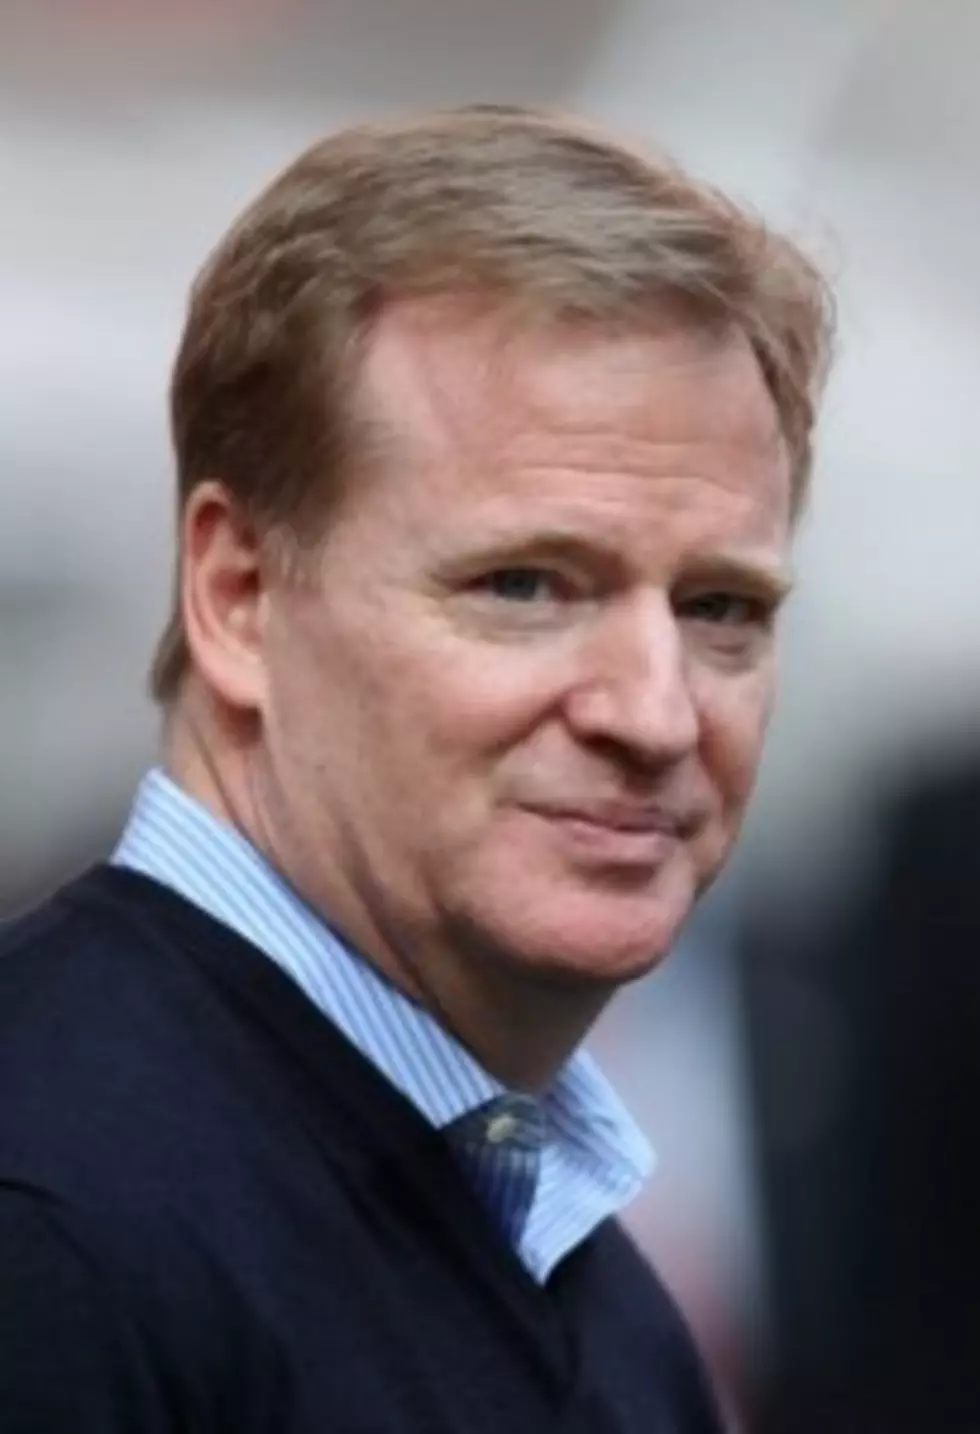 NFL Extends Roger Goodell’s Contract Through 2018 Season